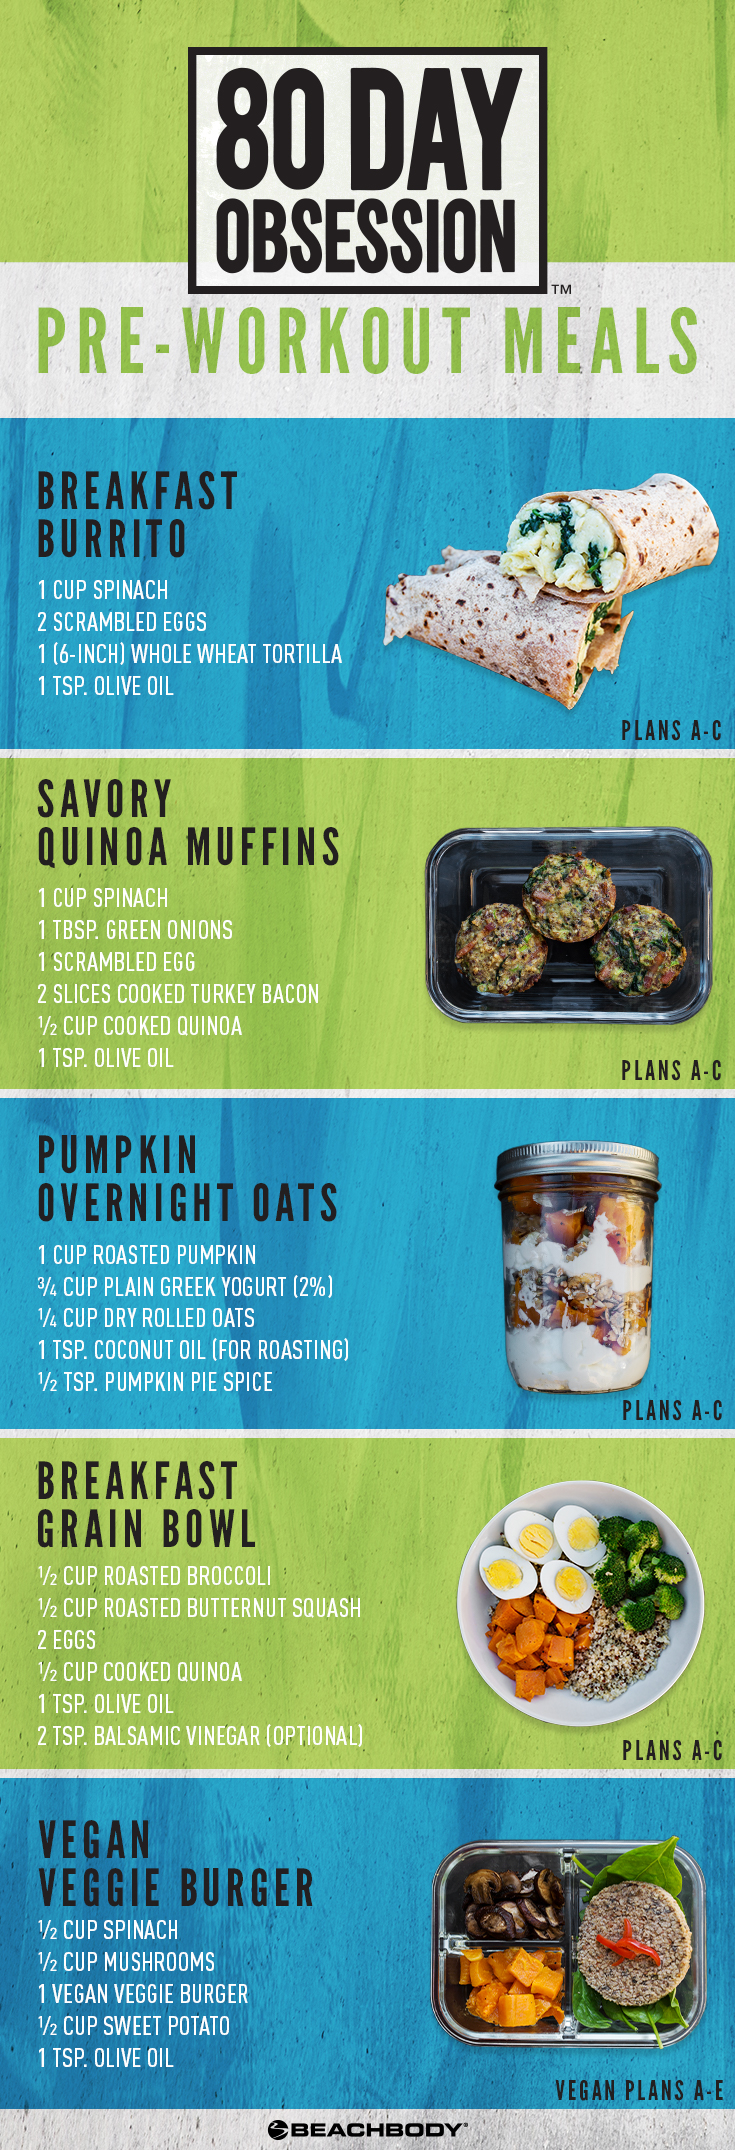 Pre-Workout Meals for 80-Day Obsession include a breakfast burrito, savory quinoa muffins, pumpkin overnight oats, breakfast grain bowl, and vegan veggie burger